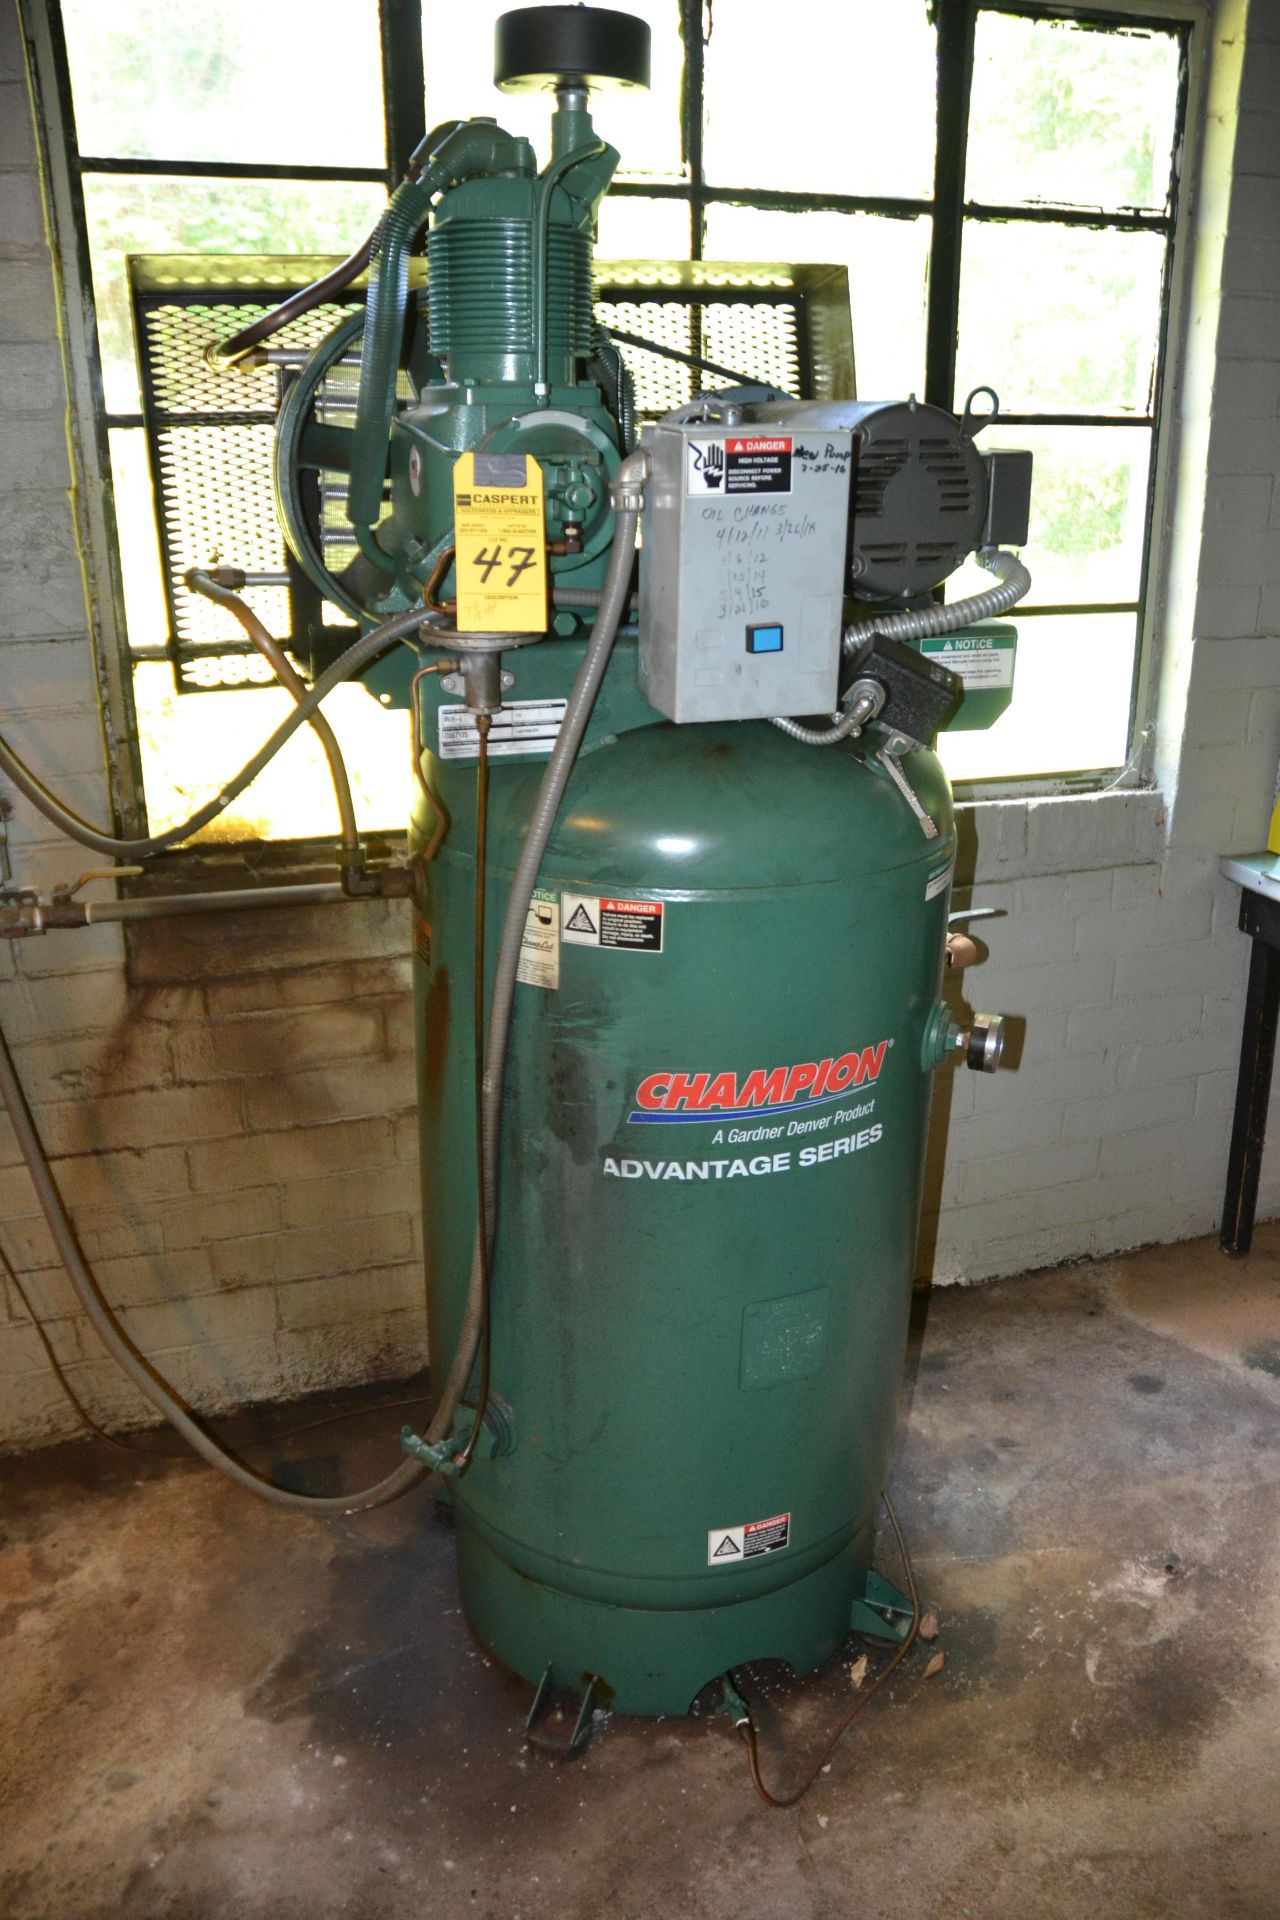 CHAMPION 7 1/2 HP COMPRESSOR WITH AIR DRYER